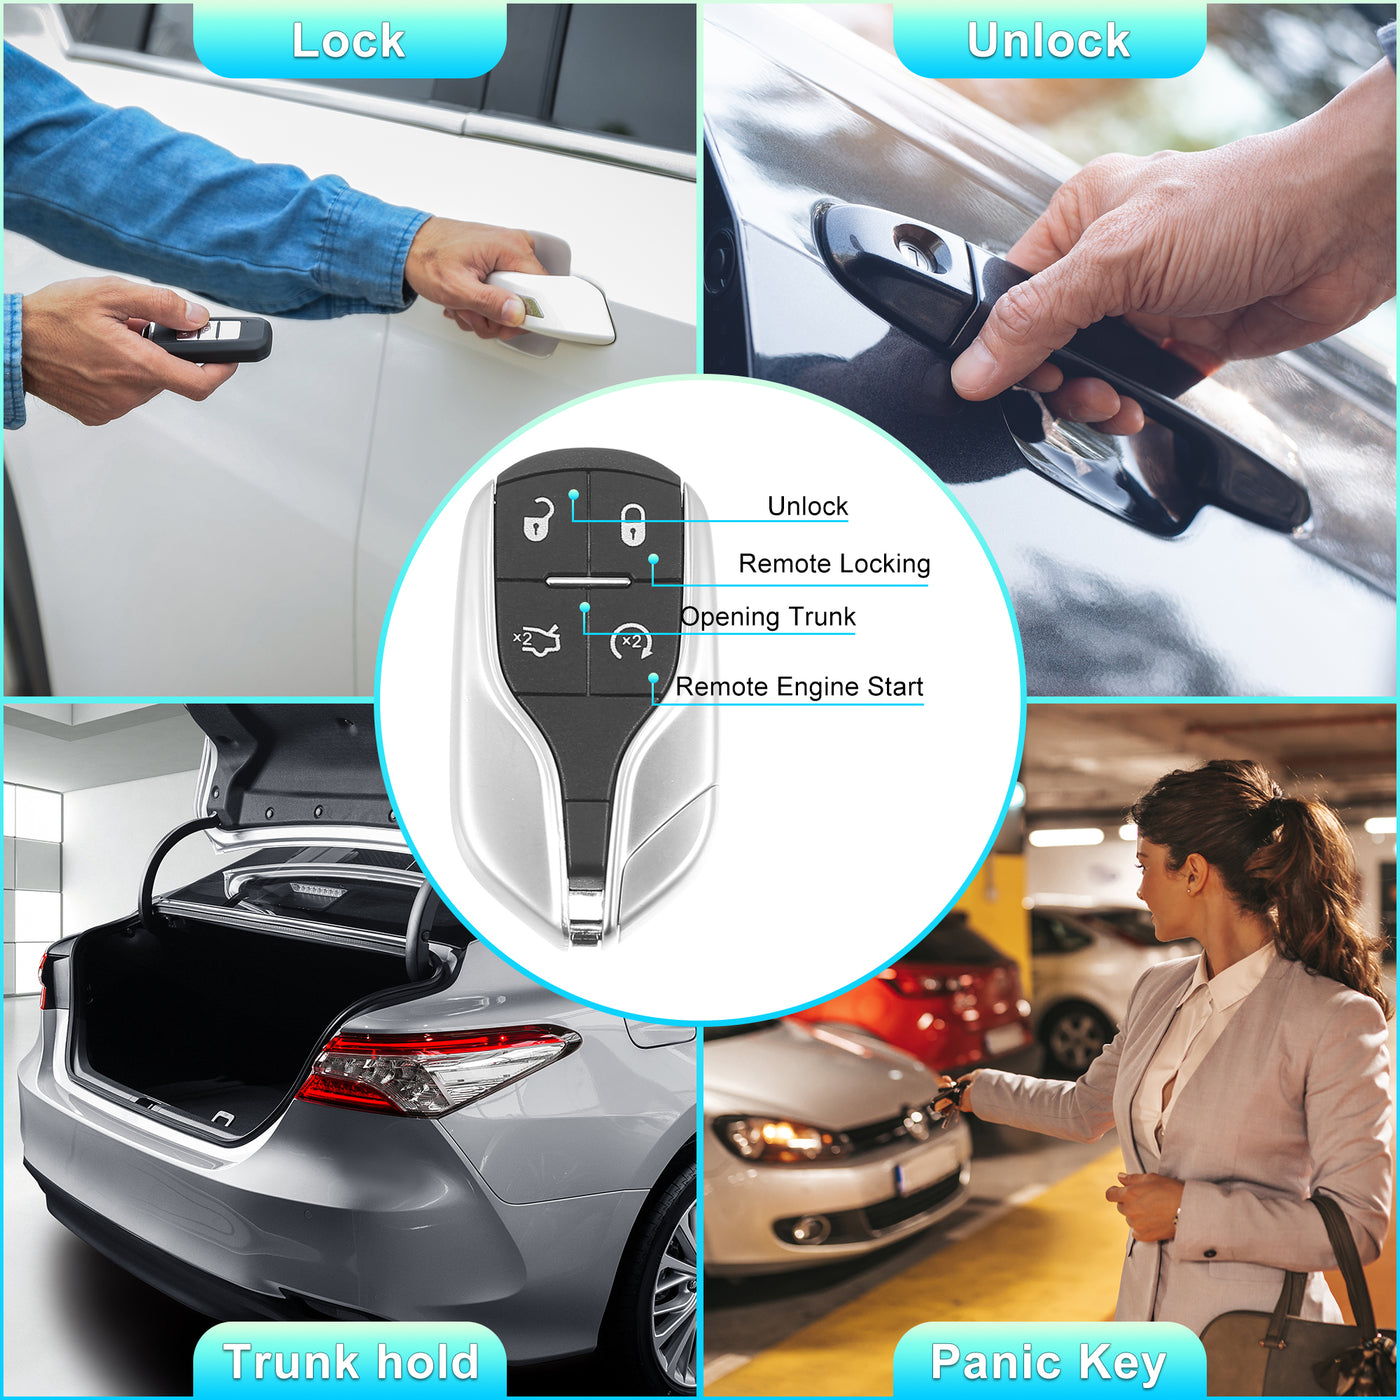 X AUTOHAUX 433MHz M3N-7393490 Replacement Smart Proximity Insert Keyless Entry Remote Key Fob for Ghibli 2014-2018 for Quattroporte 2012-2018 for Levante 2017-2020 4 Buttons 46 Chip